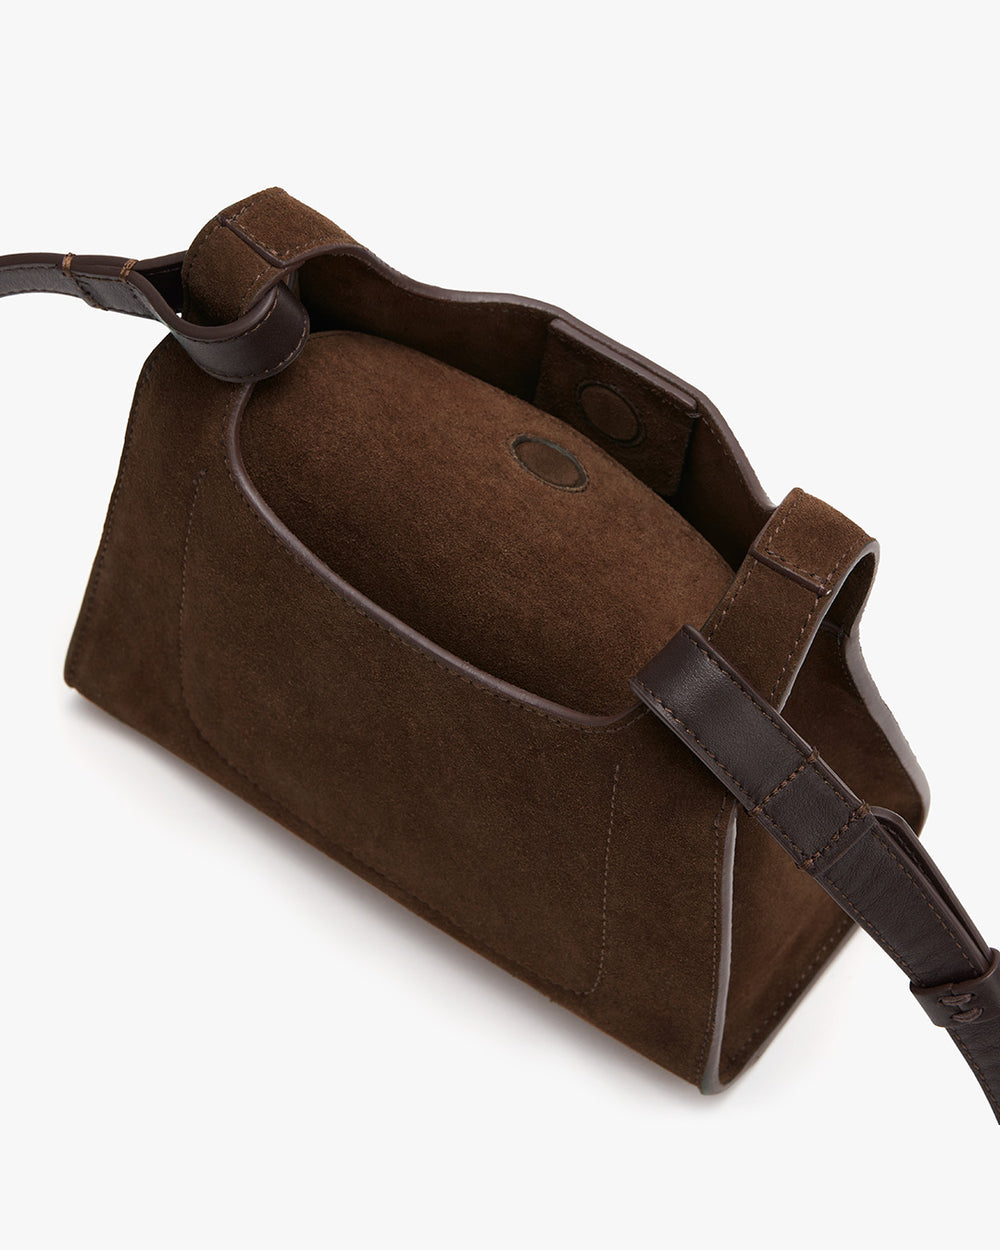 Open satchel with adjustable shoulder strap, viewed from above.